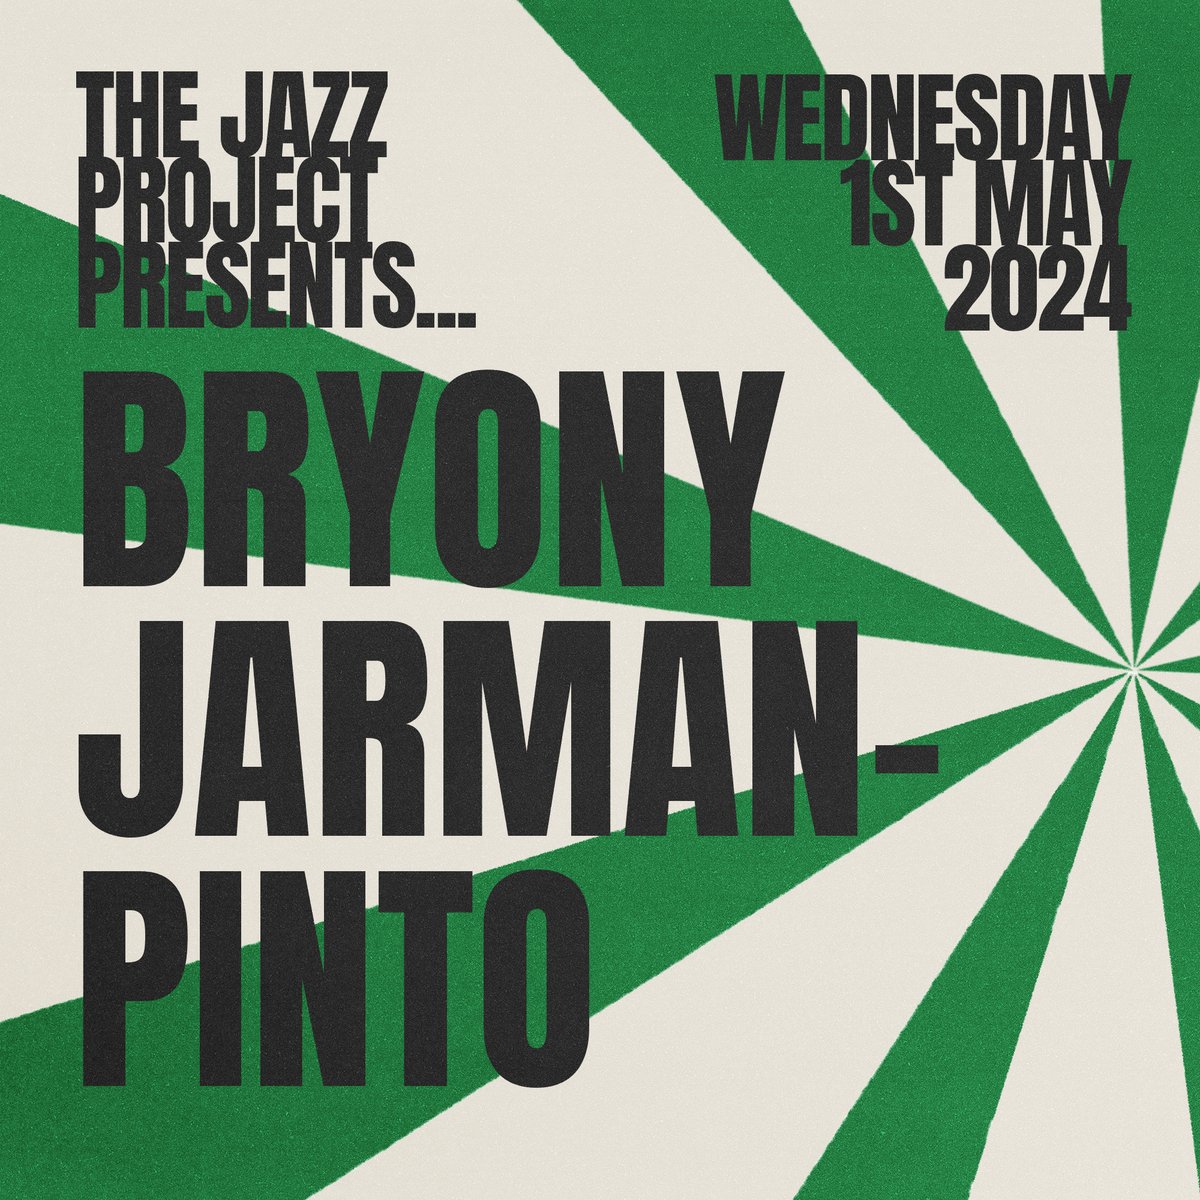 🗓️ Join us on Wednesday 1st May 2024 at Granby Winter Garden for The Jazz Project. We've got the legendary Bryony Jarman-Pinto coming to share her story and influences ahead of her highly anticipated album launch on the 10th May 2024. Get tickets here: fatsoma.com/e/wgzn5ys2/the…